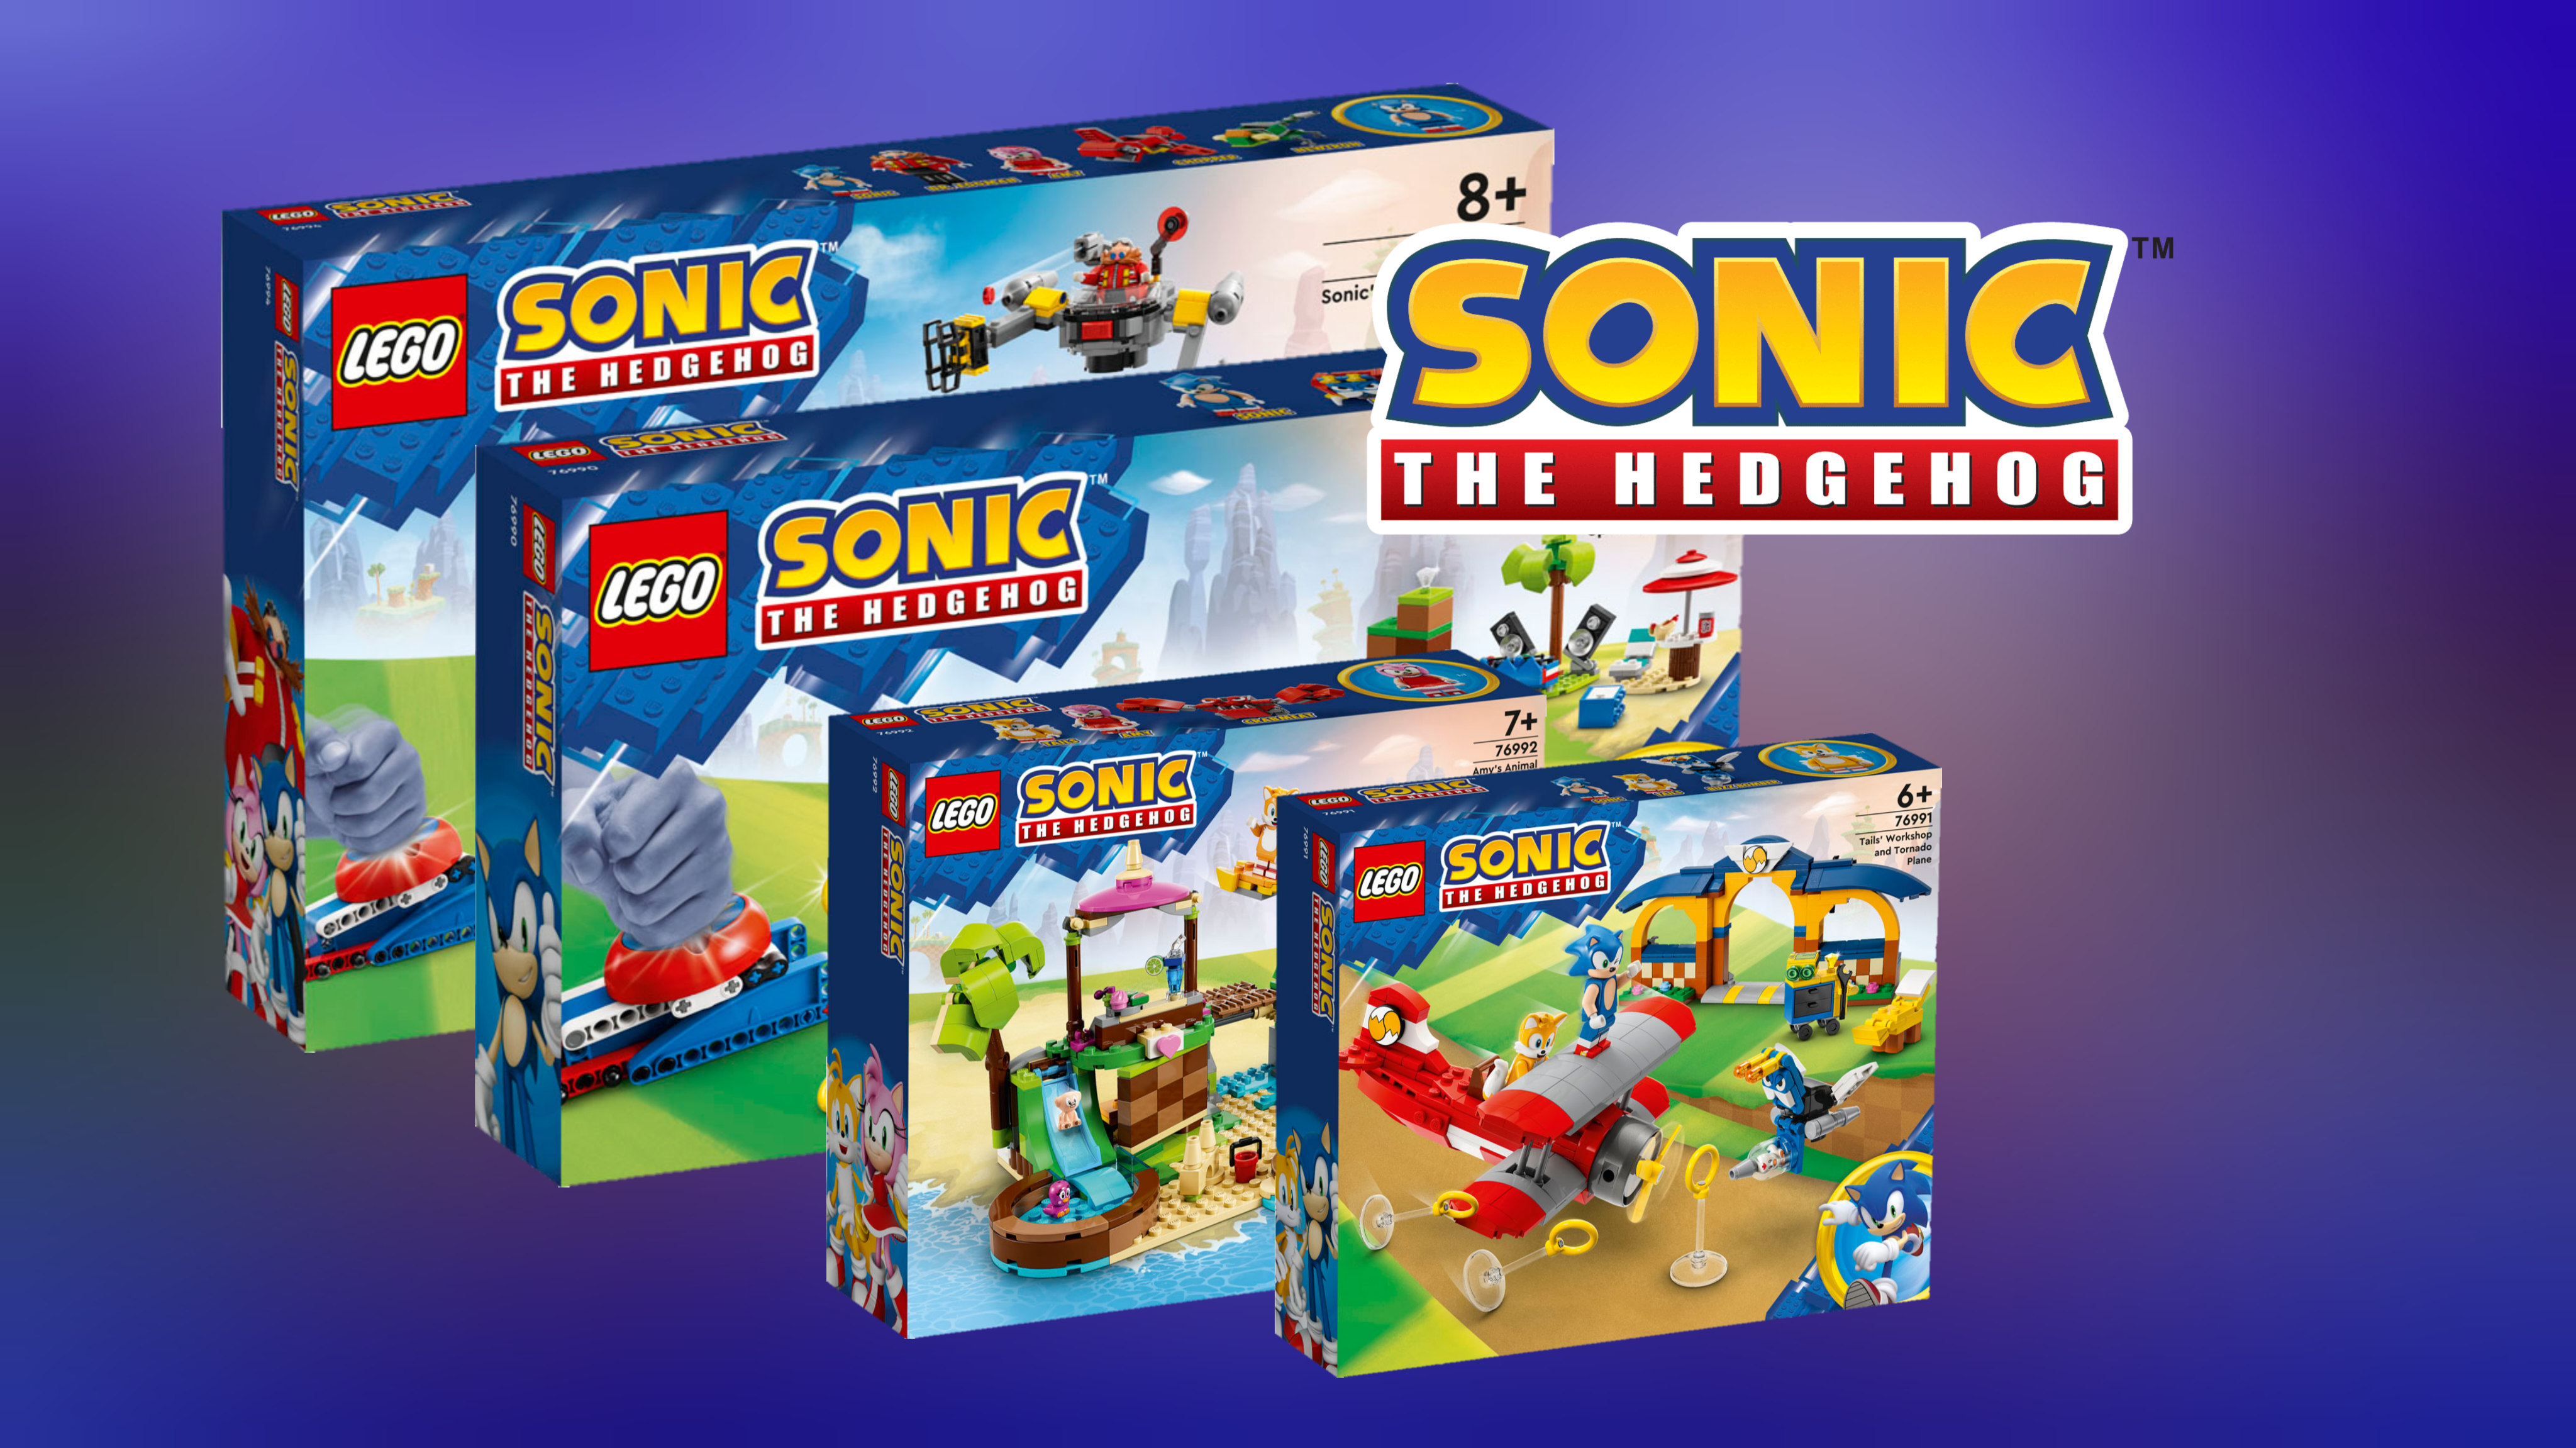 LEGO Sonic The Hedgehog Tails' Workshop and Tornado Plane 76991 Building  Toy Set, Airplane Toy with 4 Sonic Figures and Accessories for Creative  Role